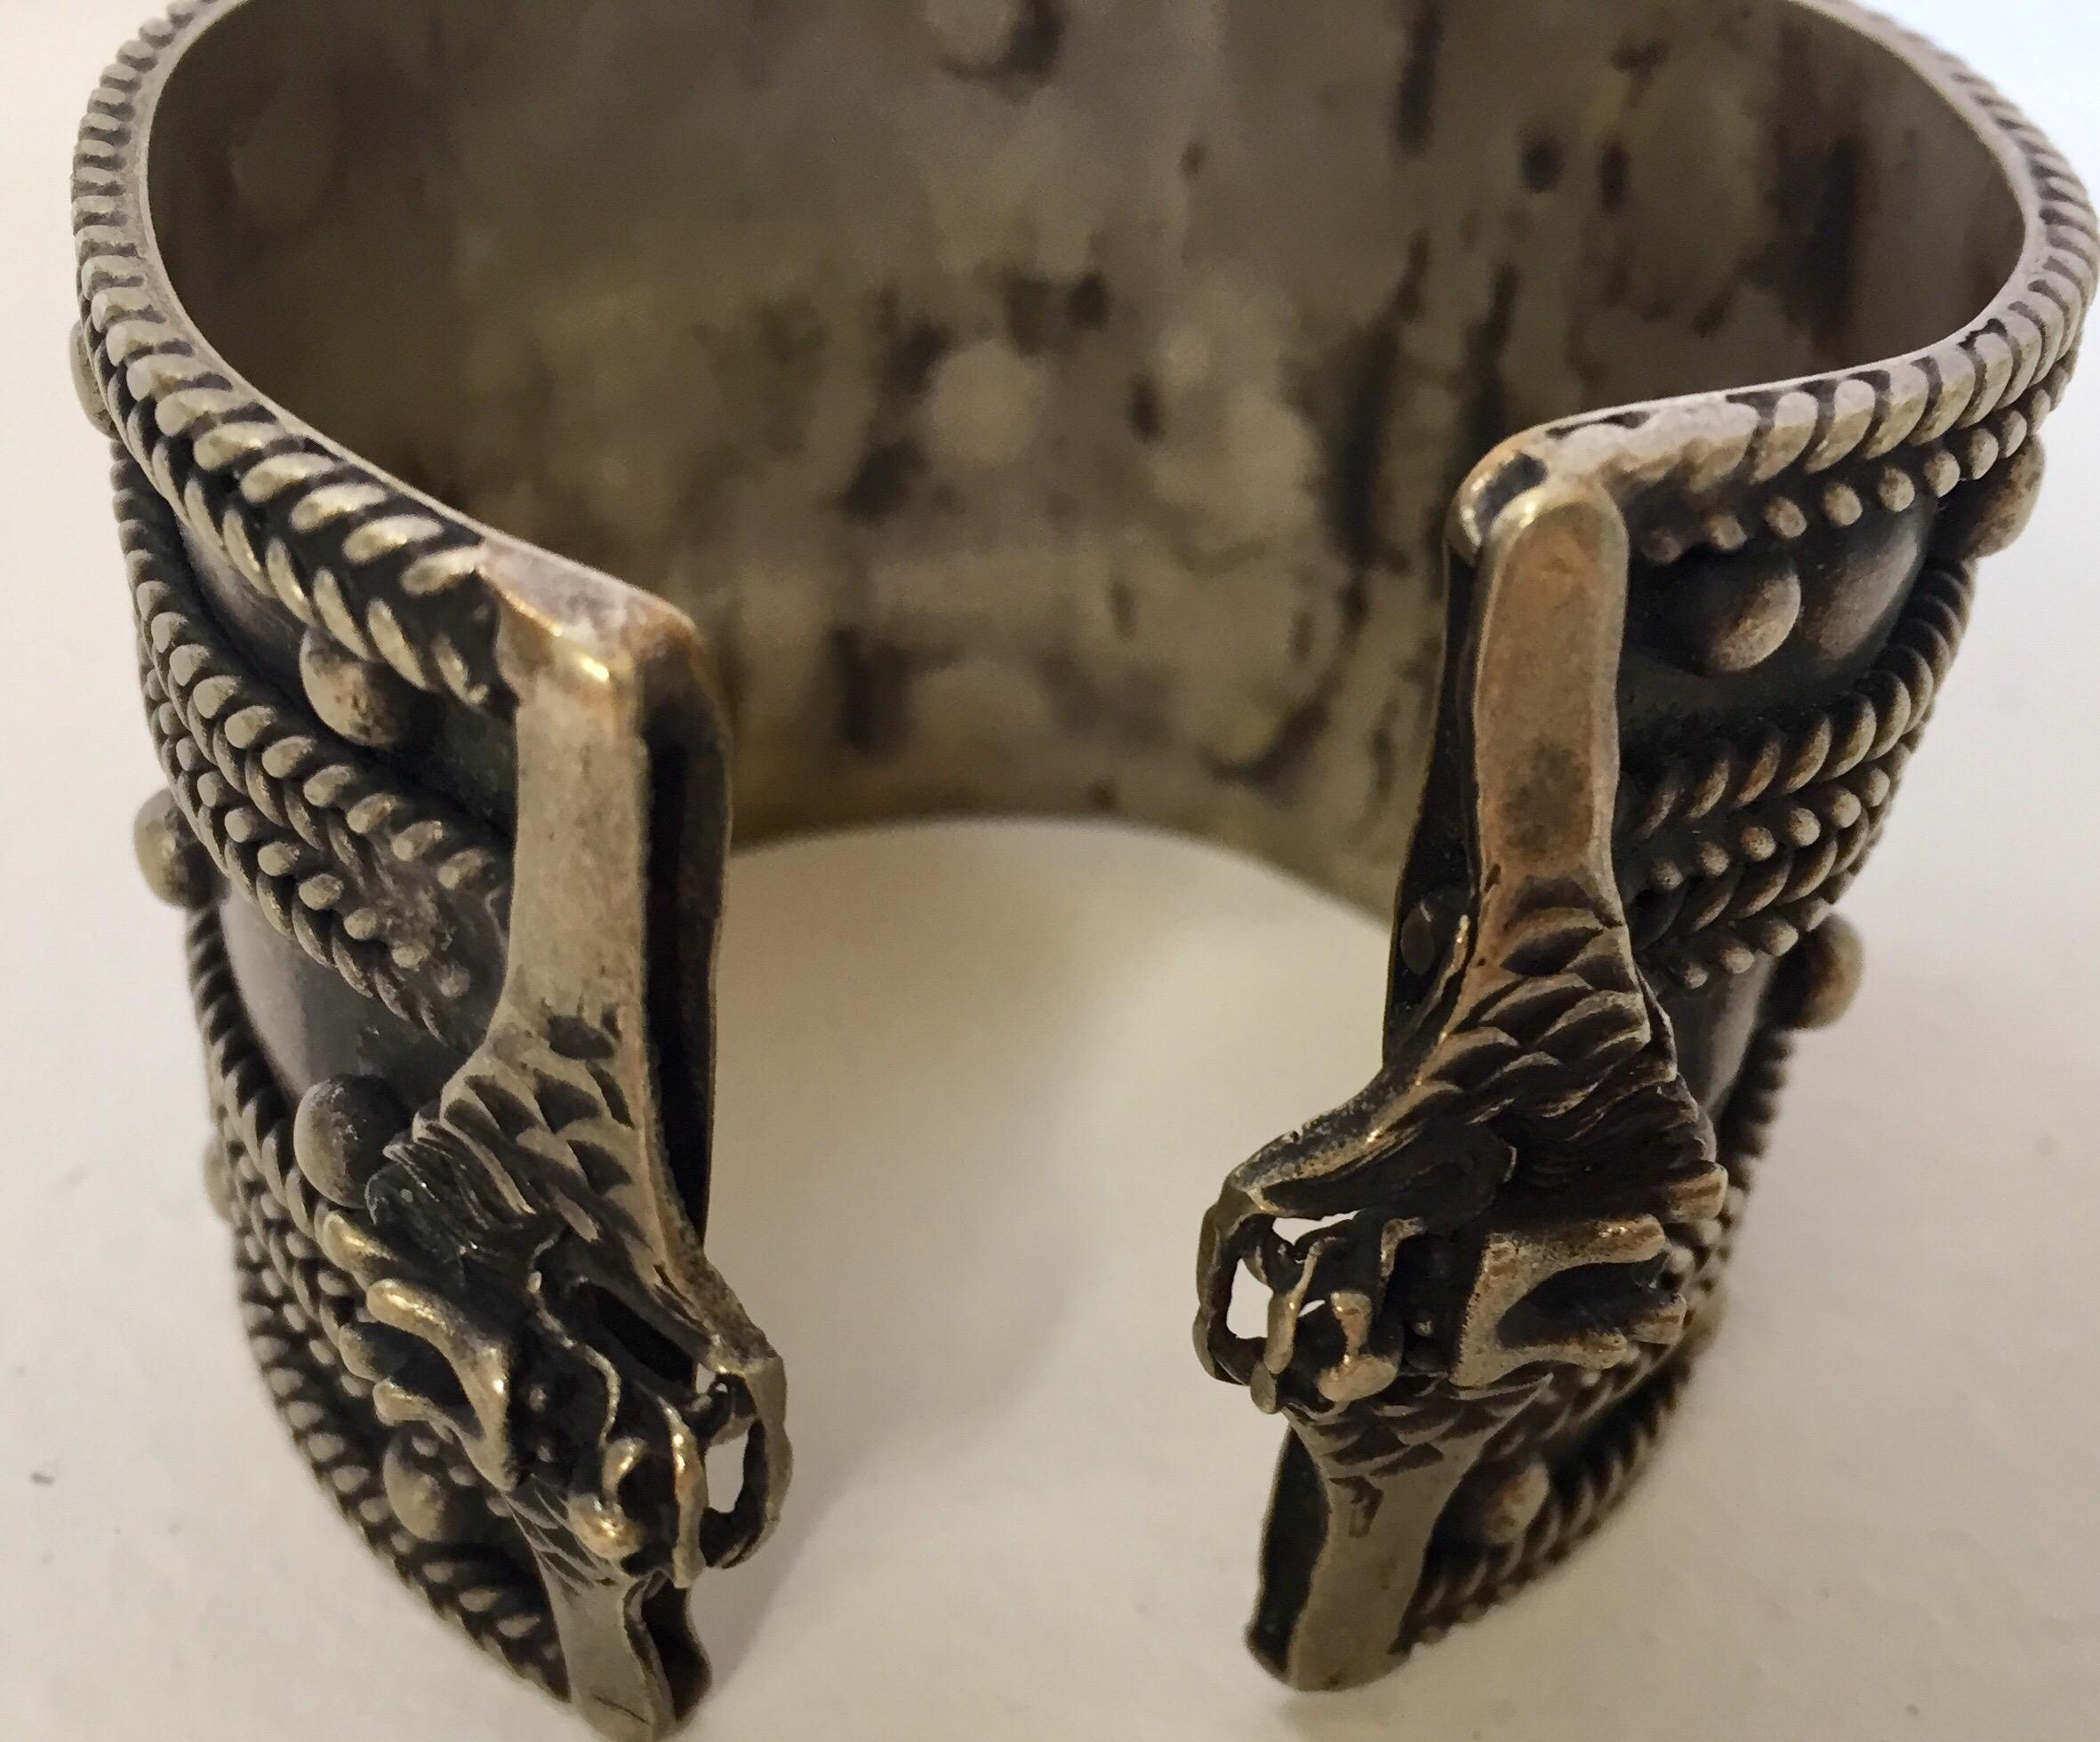 Vintage Moroccan Berber tribal bracelet from the High Atlas of Morocco. 
Handcrafted by Berber women using Moroccan silver nickel. 
The ethnic Nomadic and Bedouin jewelry from the Maghreb and North Africa is usually made of german silver and the